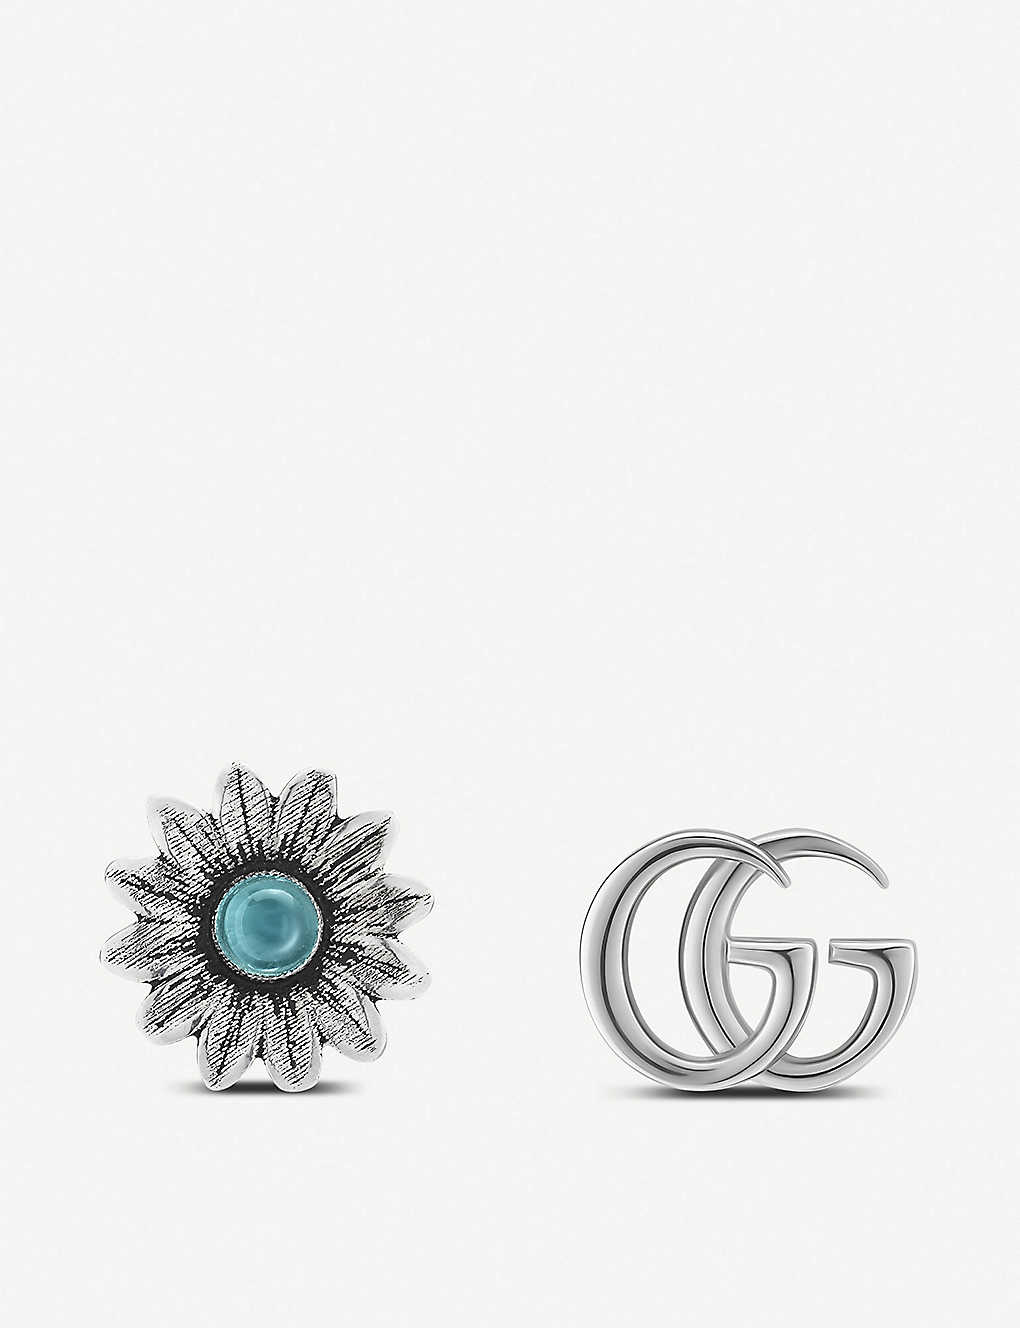 GG Marmont gemstone and sterling silver stud earrings(6653907)